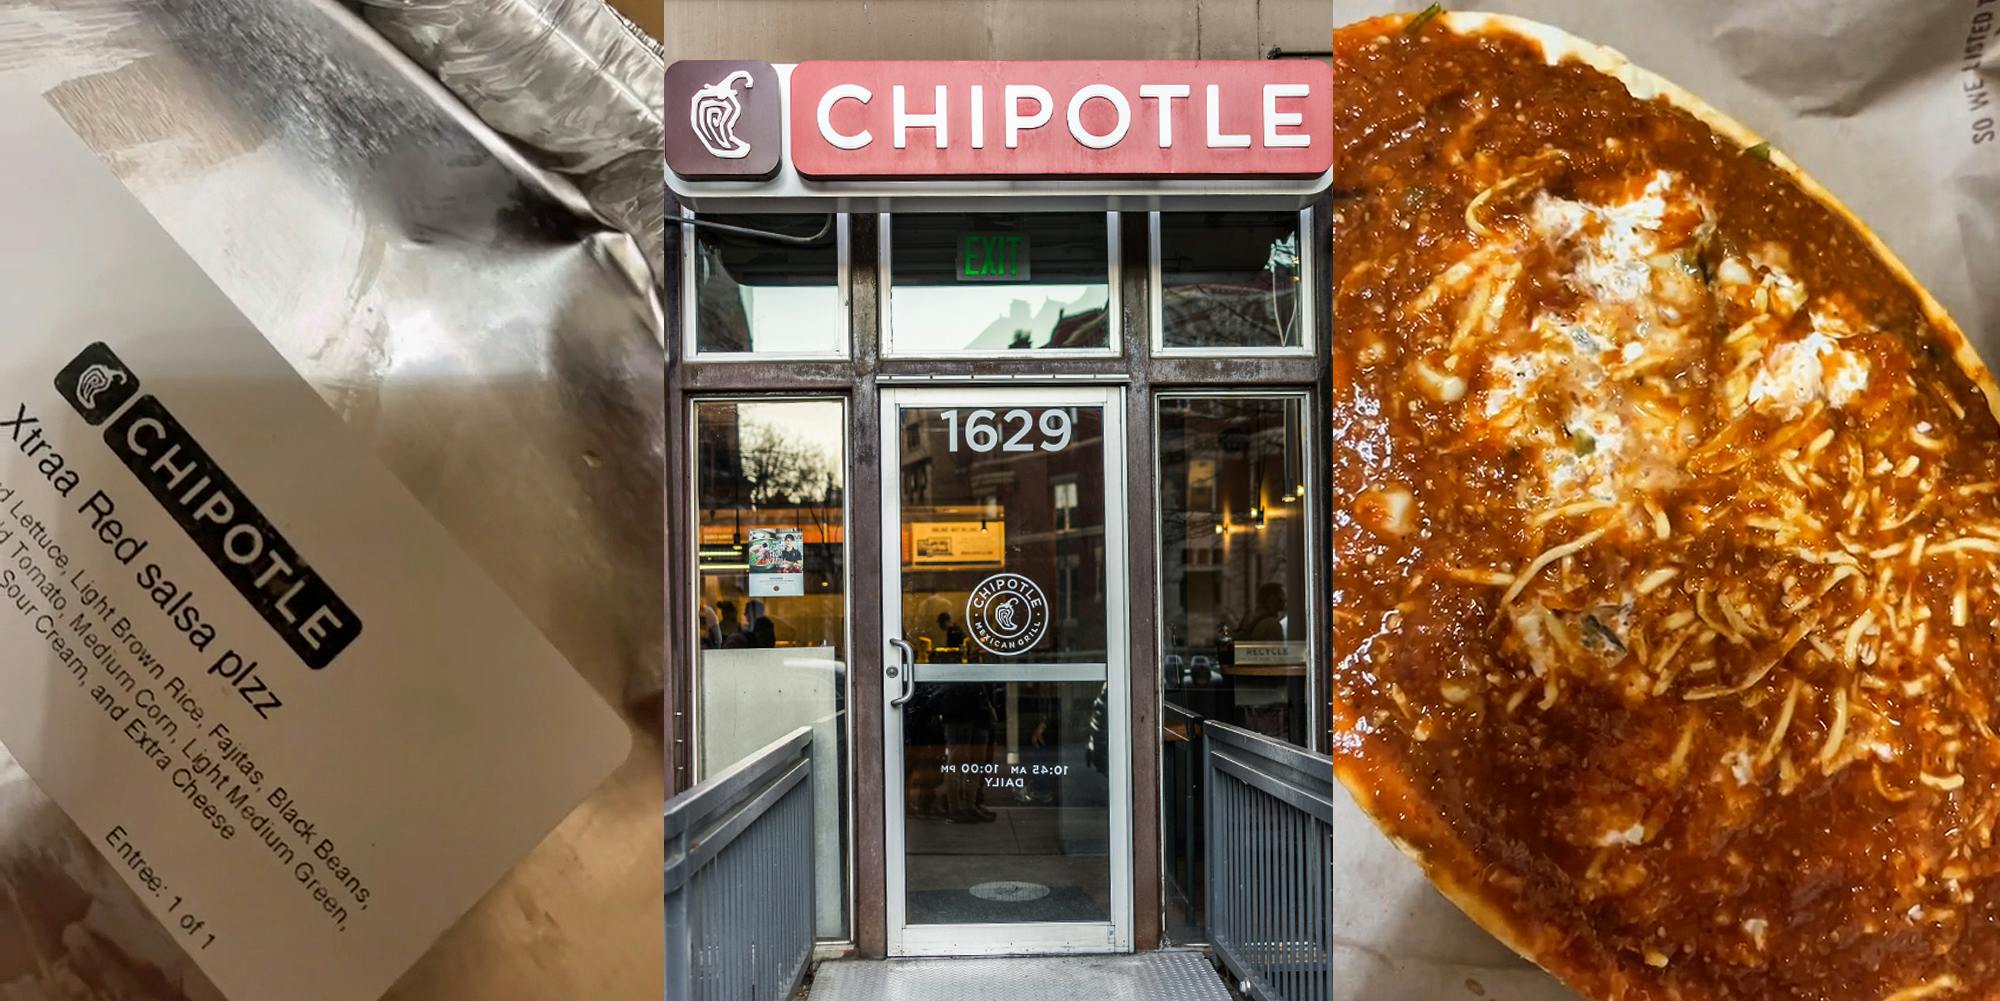 Chipotle food in container with sticker reading "Xtra Red salsa plzz" (l) Chipotle sign over doorway (c) Chipotle bowl drenched with red salsa (r)